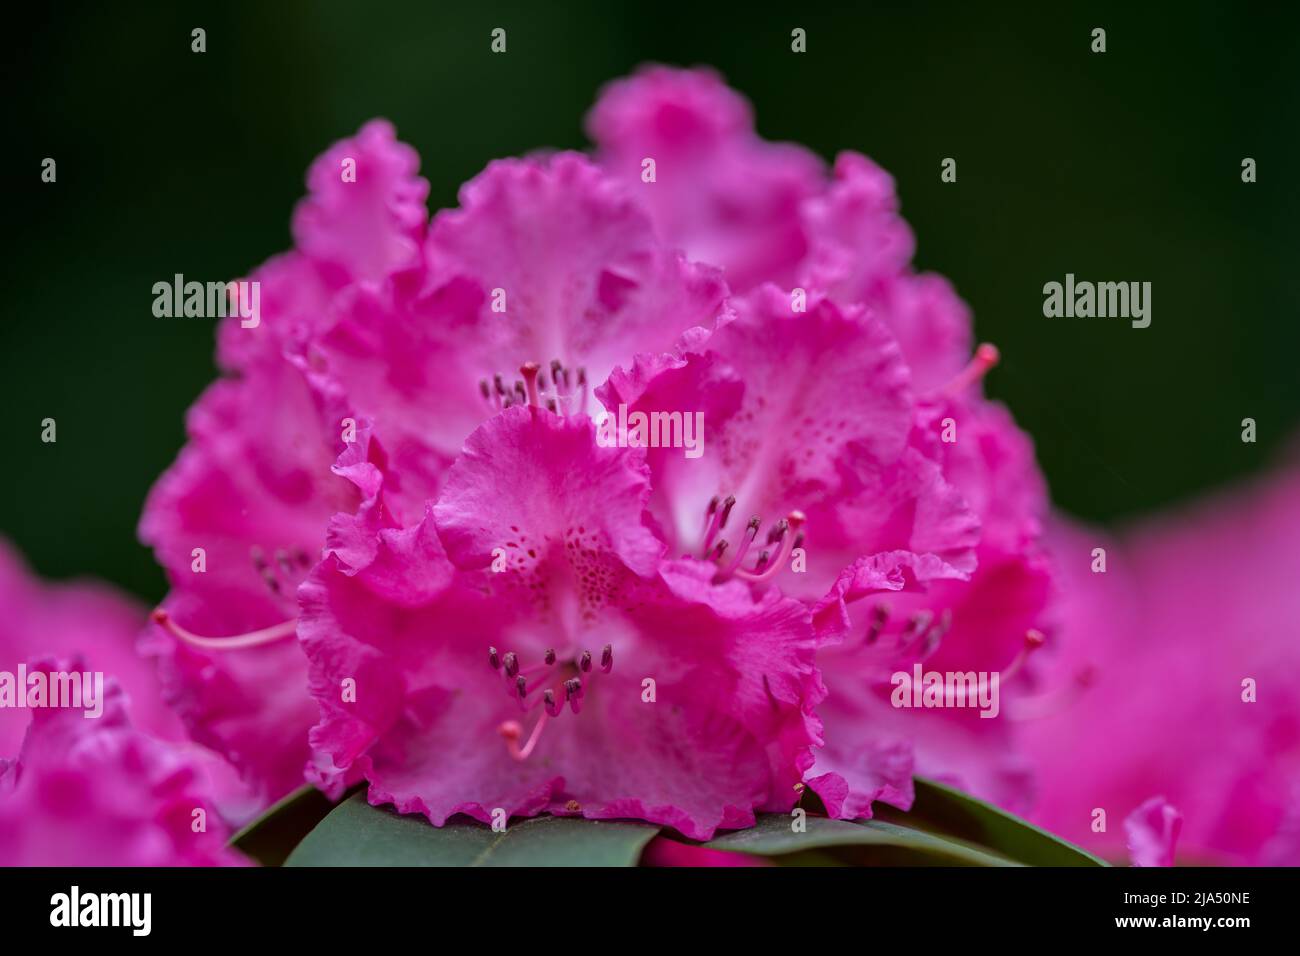 Lush,colorful pink Rhododendron  Germania blossom flowers close up Stock Photo